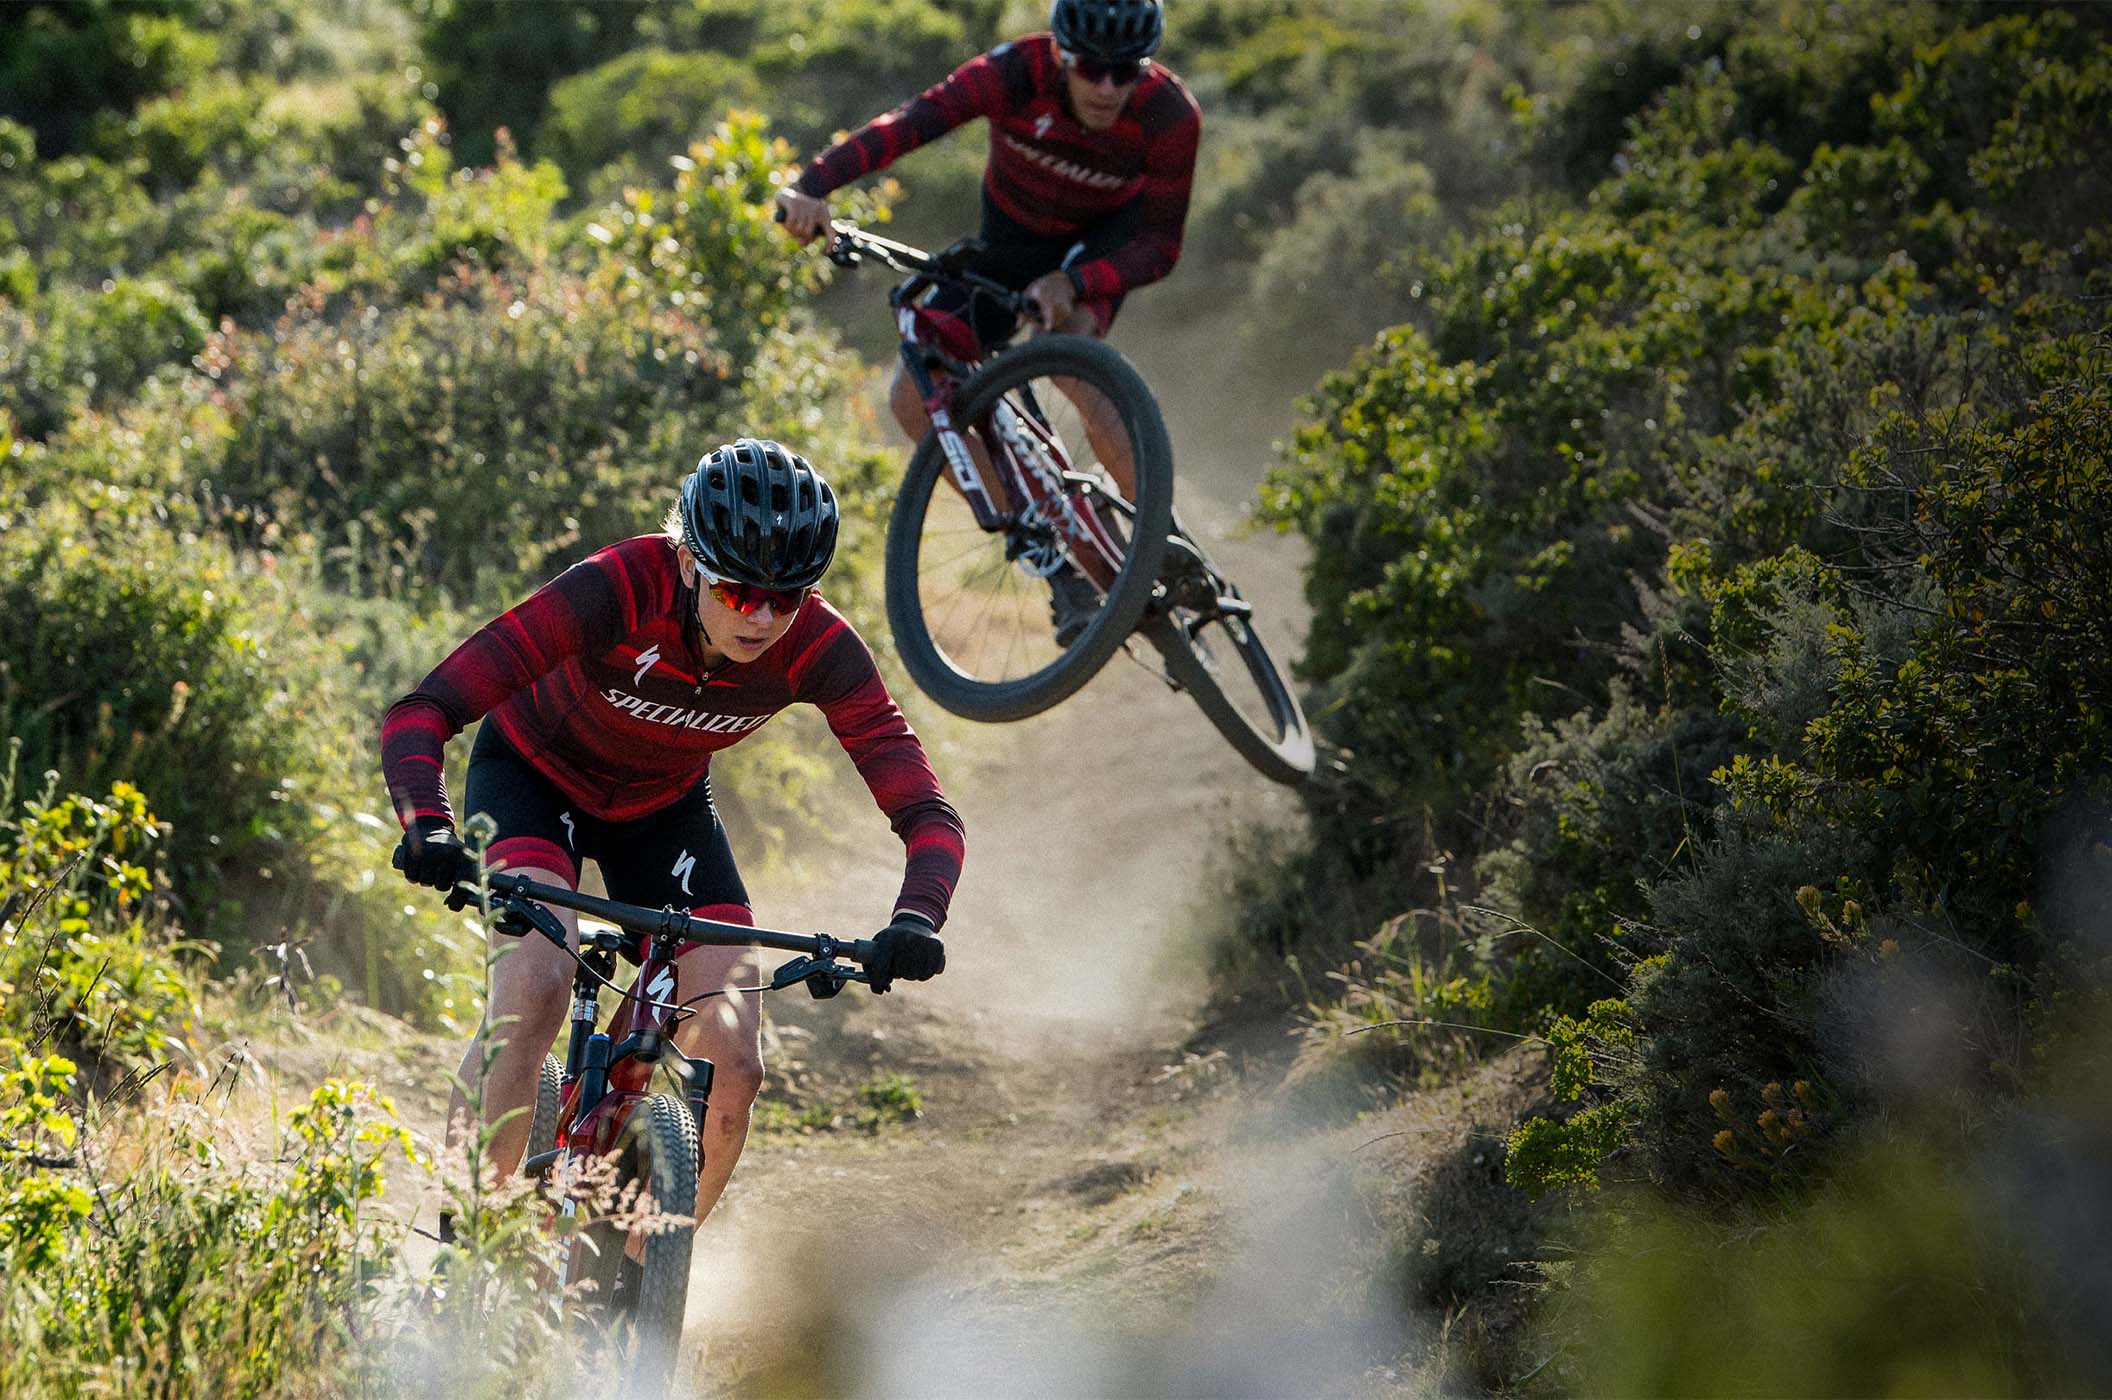 VTT Specialized – We love Riding